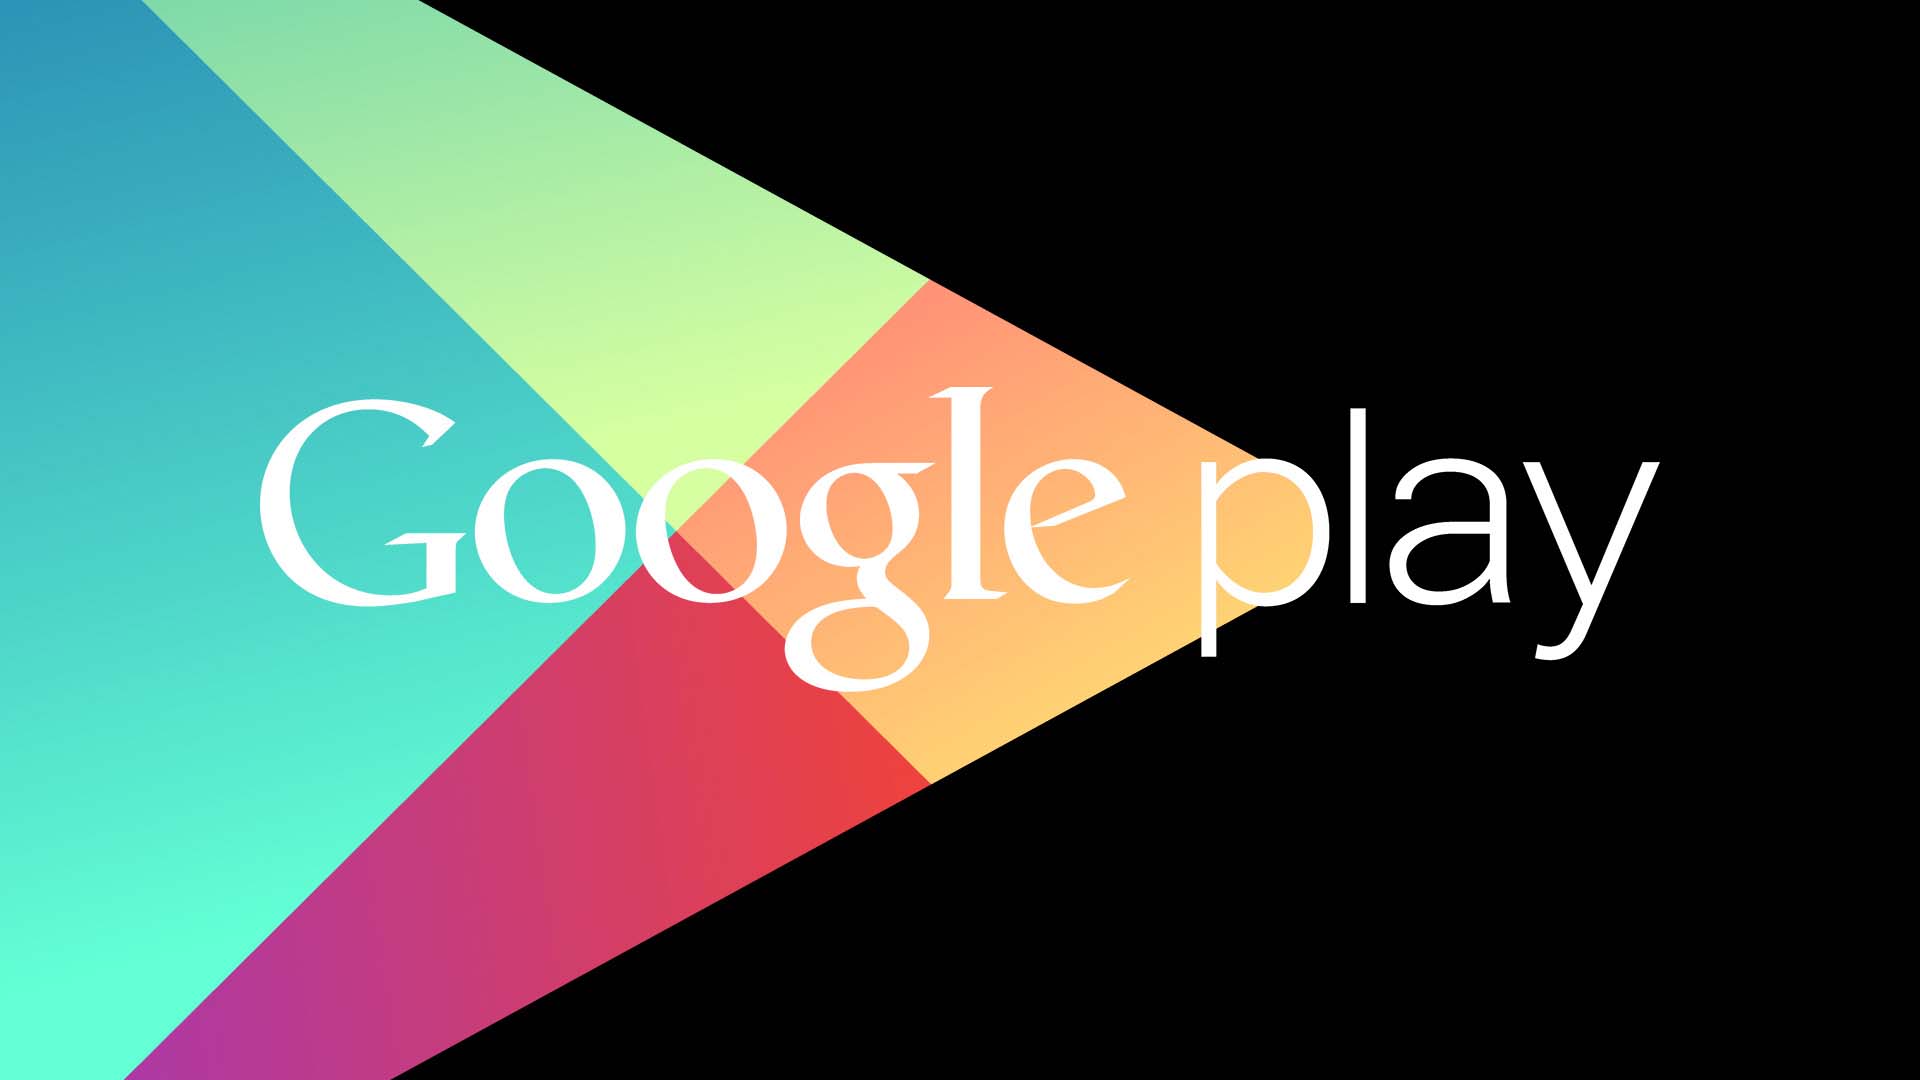 Google Play Store 6.9.20 Download In APK: Here Are the Changes Added